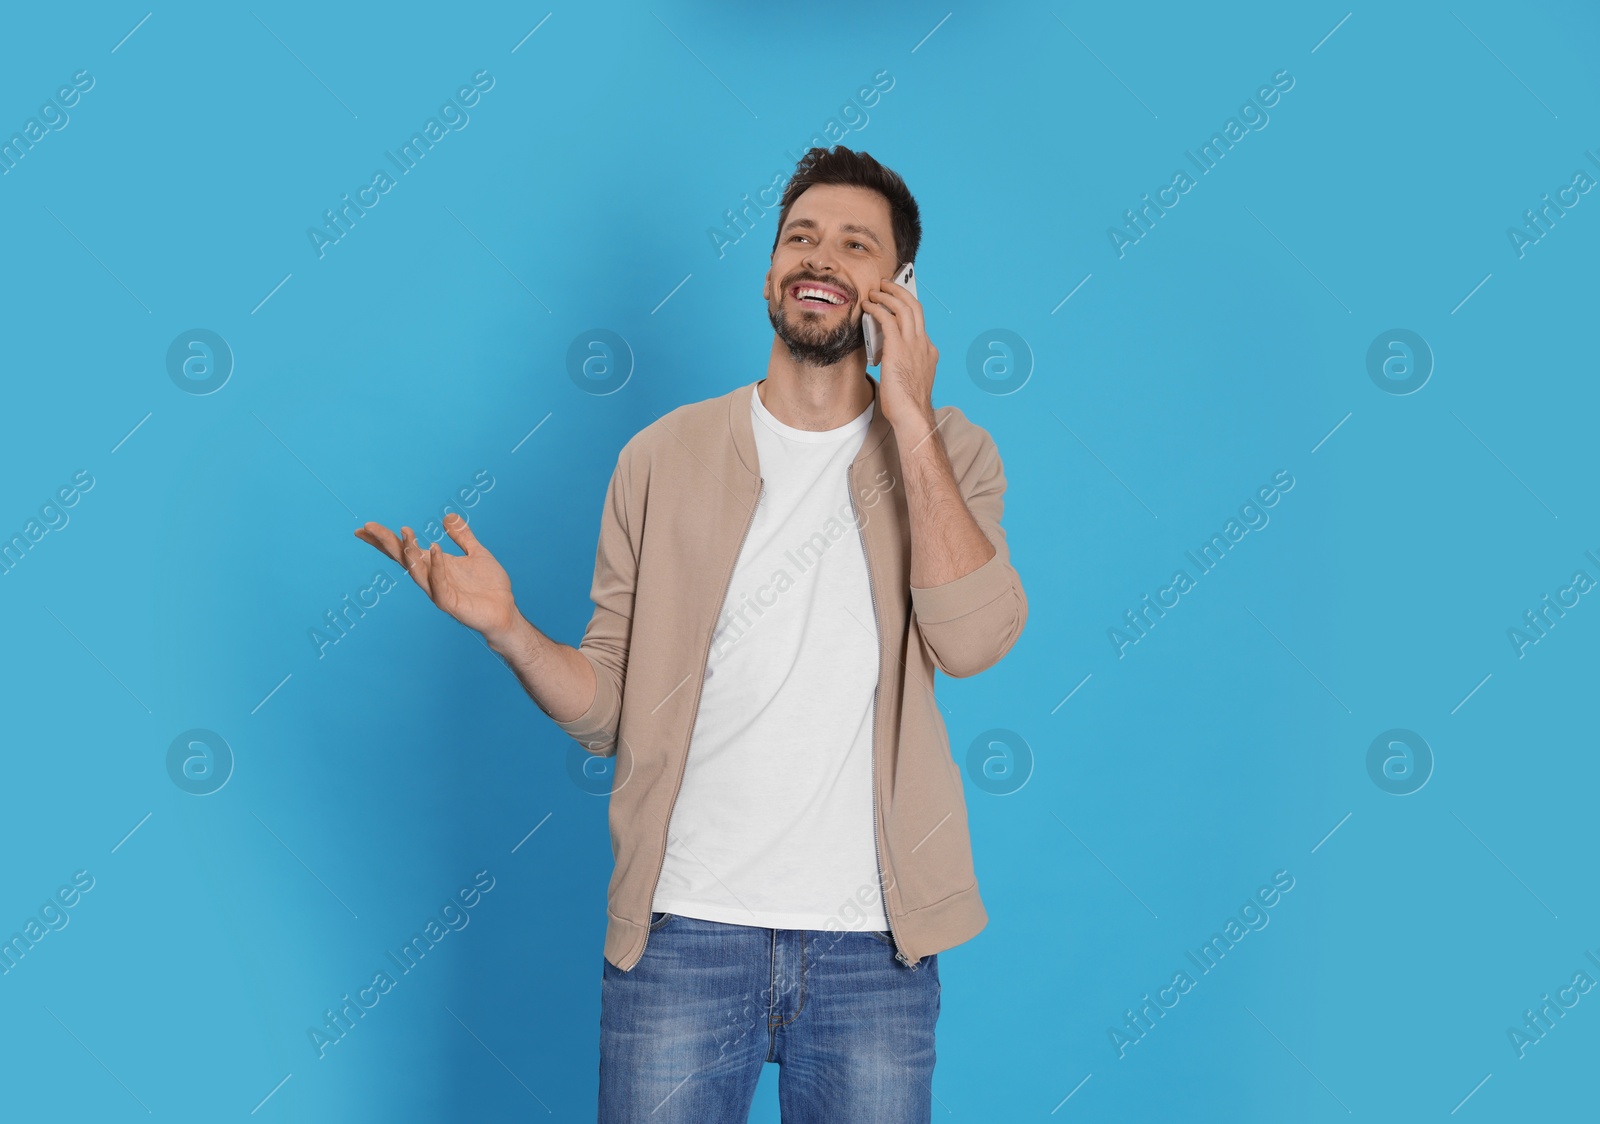 Photo of Man talking on phone against light blue background